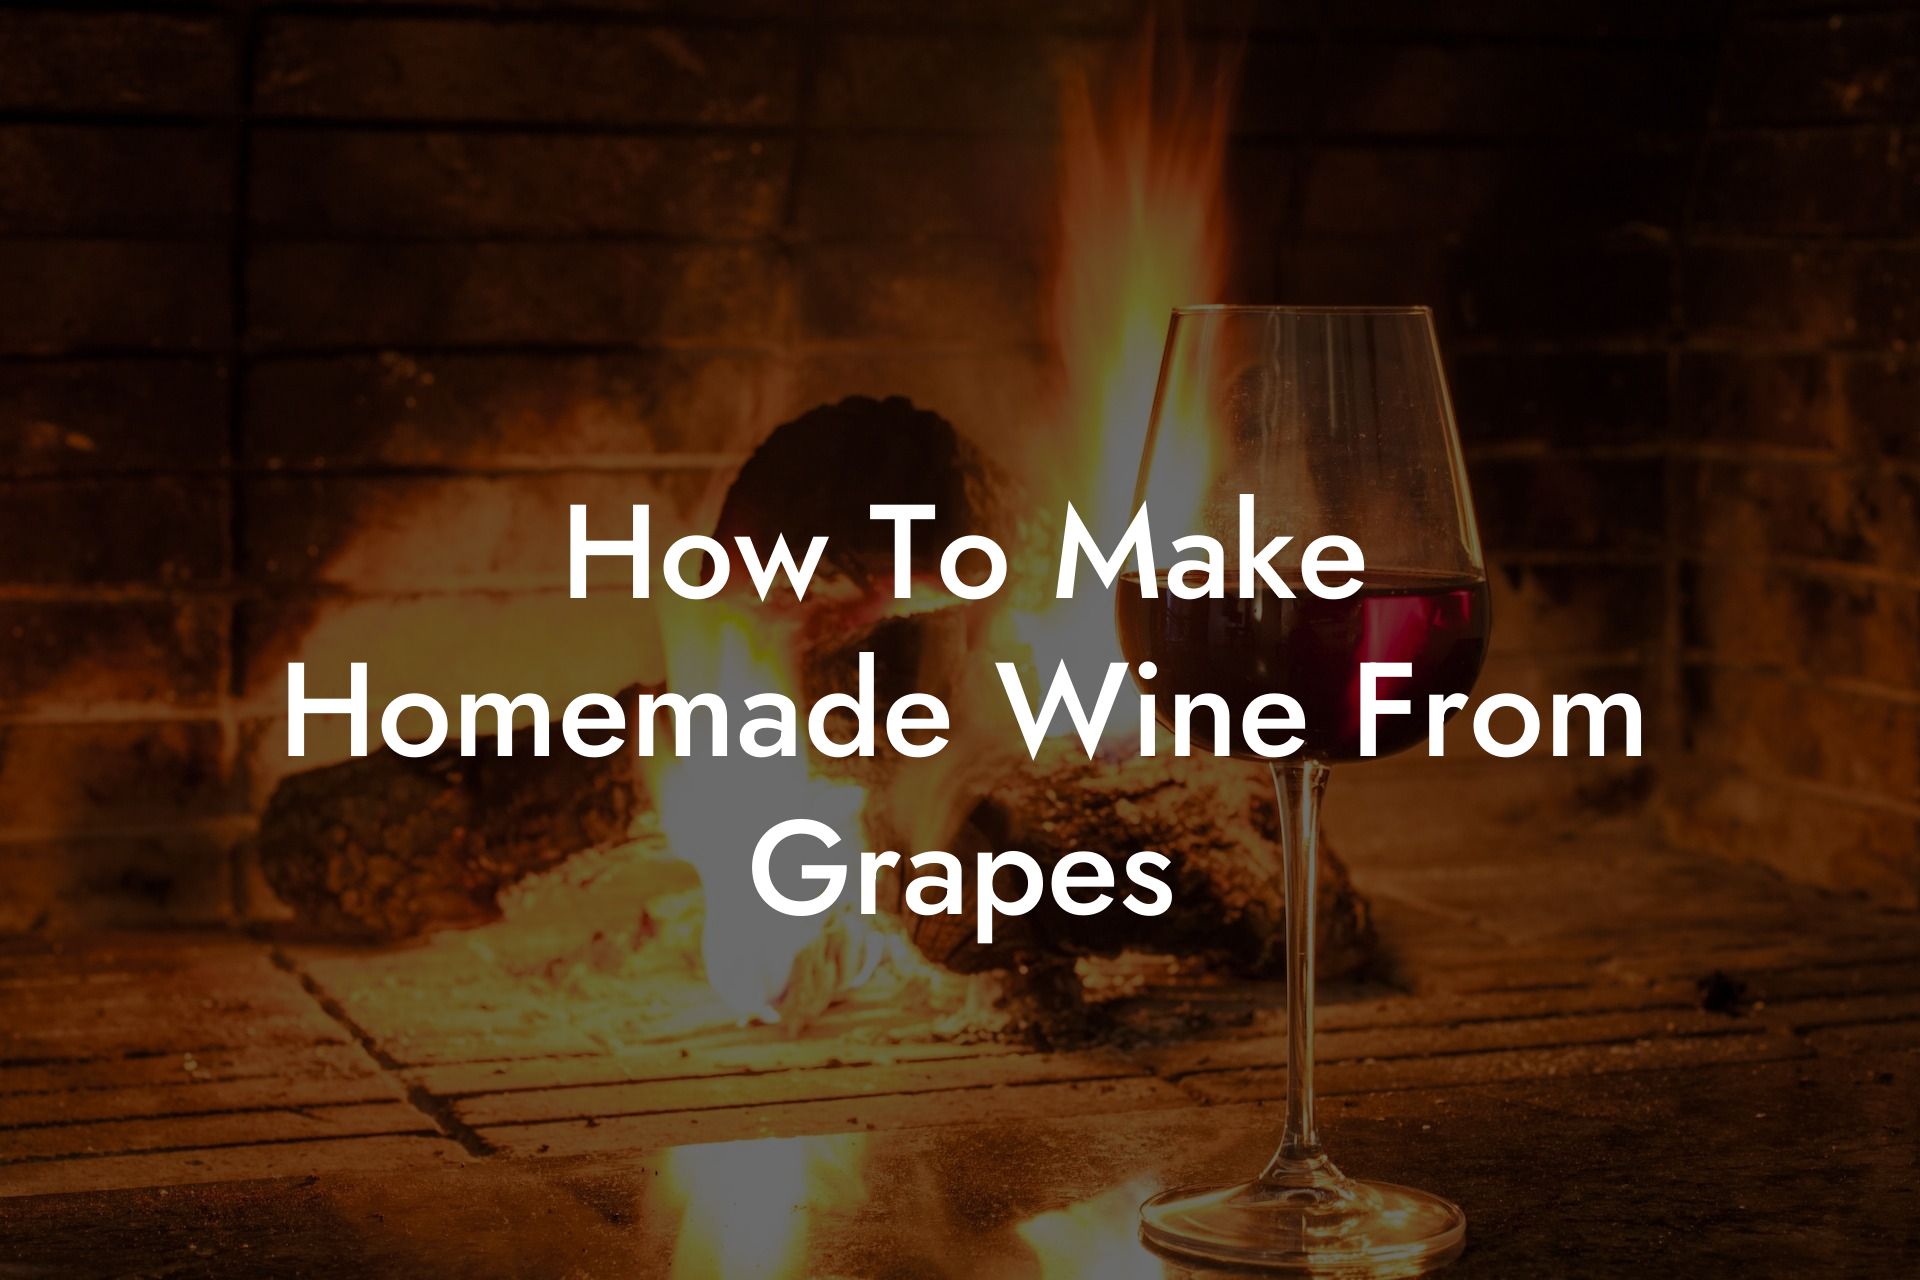 How To Make Homemade Wine From Grapes